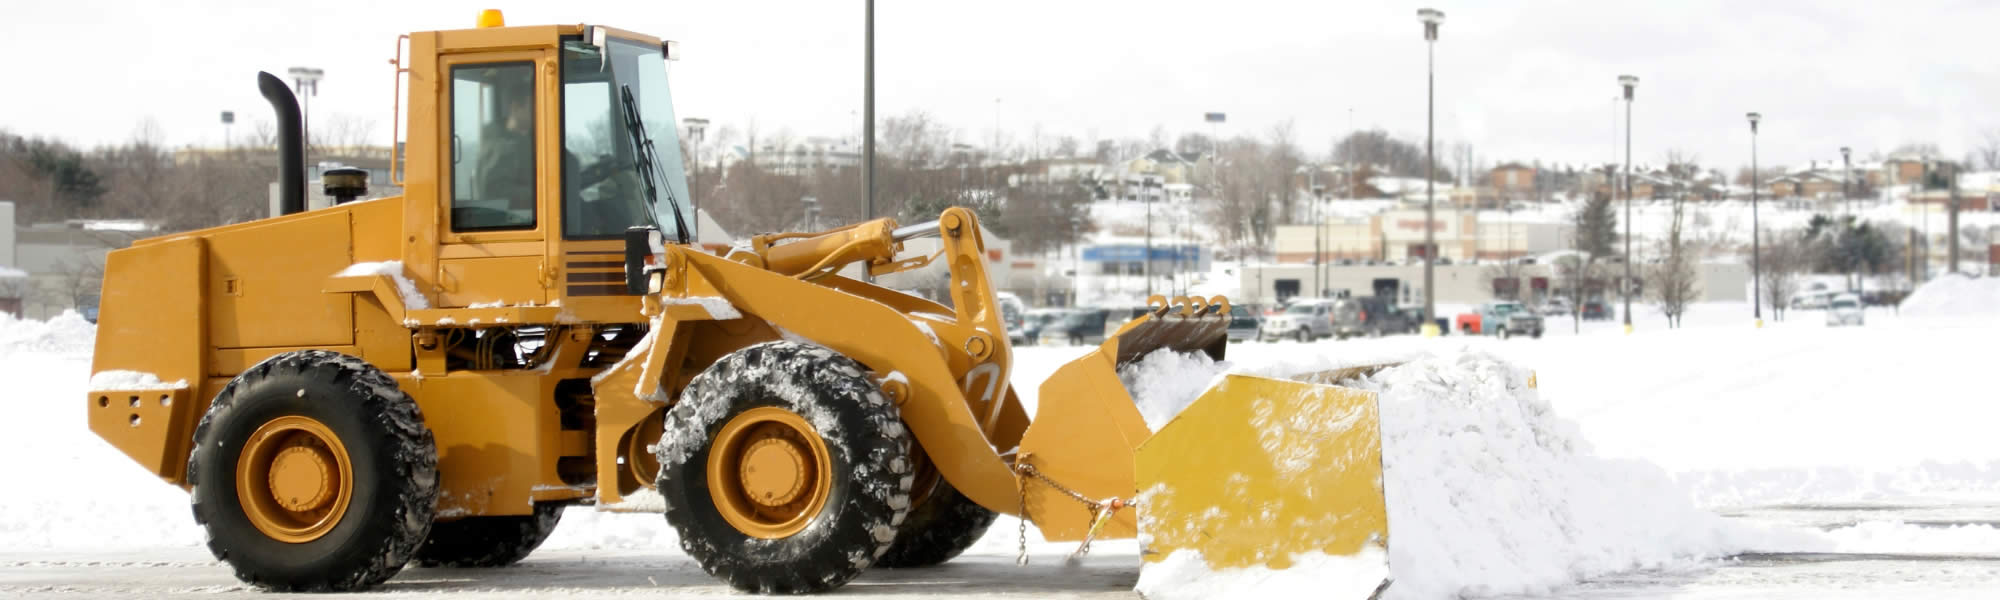 Bellevue Snow and Ice Removal Services near me